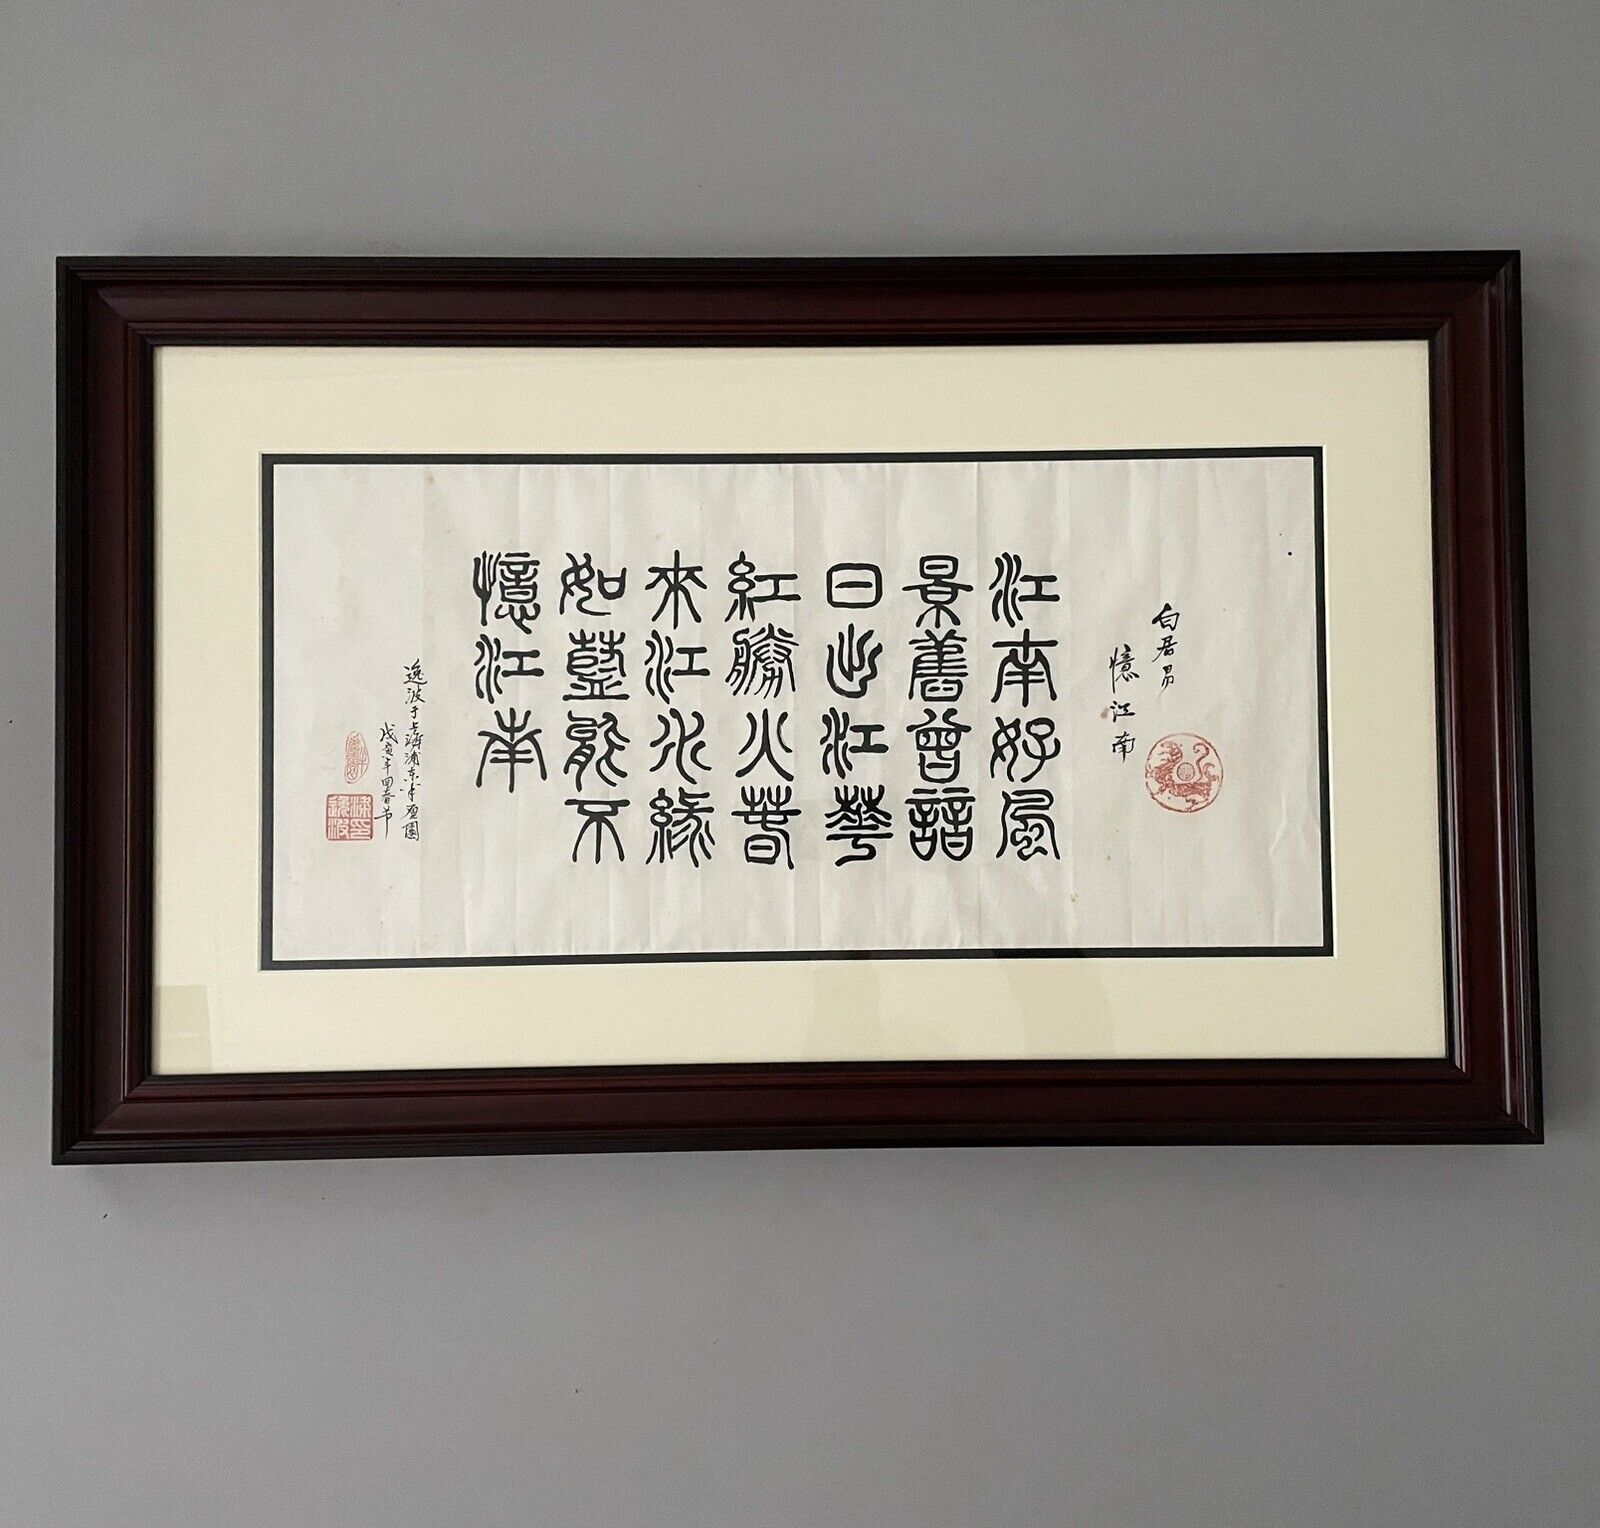 Vintage Chinese Calligraphy 白居易 忆江南 36”x22“, Used